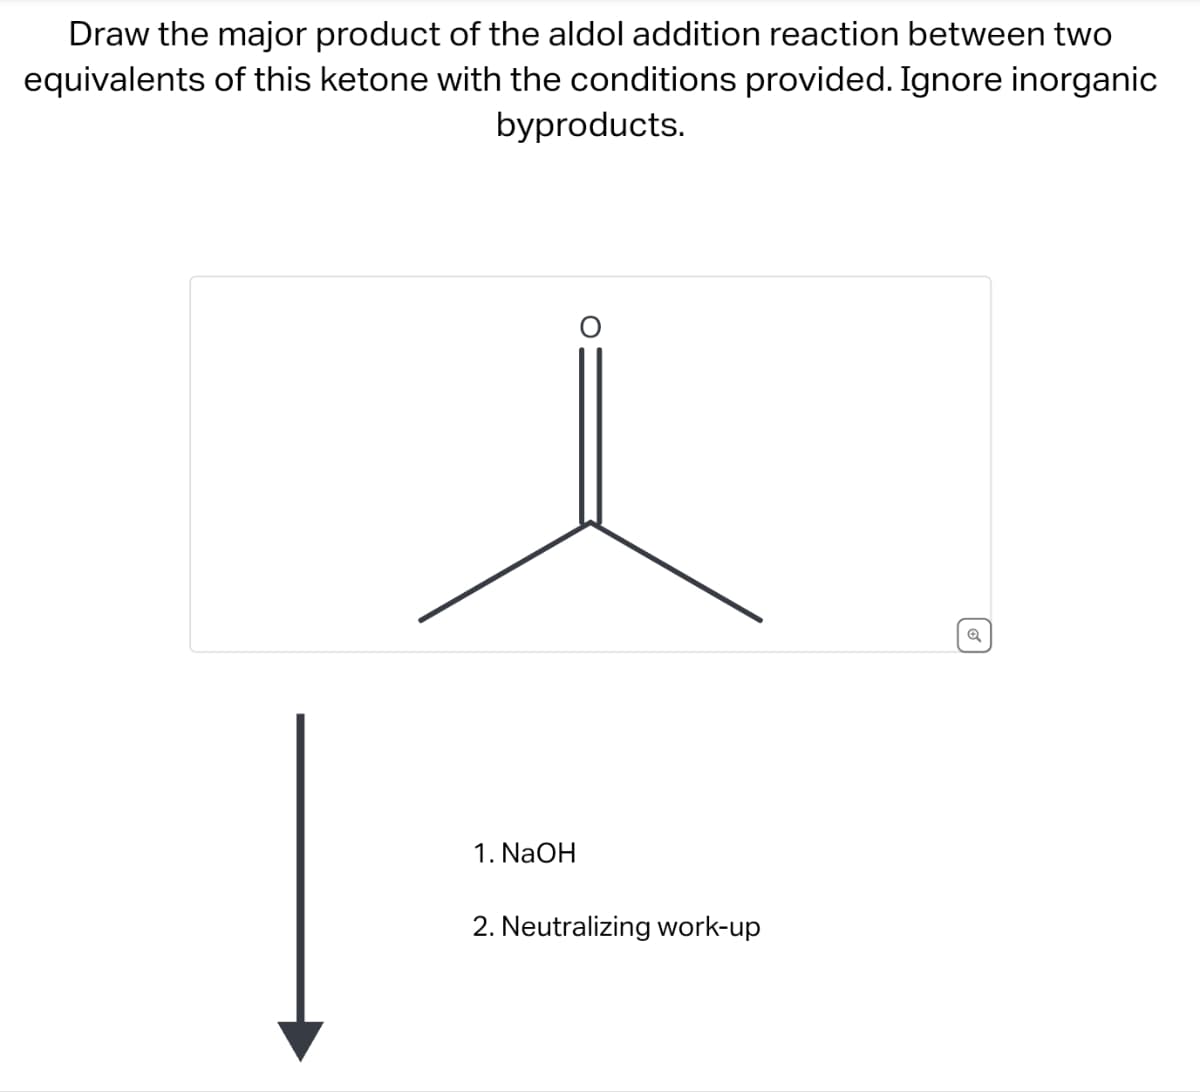 Draw the major product of the aldol addition reaction between two
equivalents of this ketone with the conditions provided. Ignore inorganic
byproducts.
1. NaOH
2. Neutralizing work-up